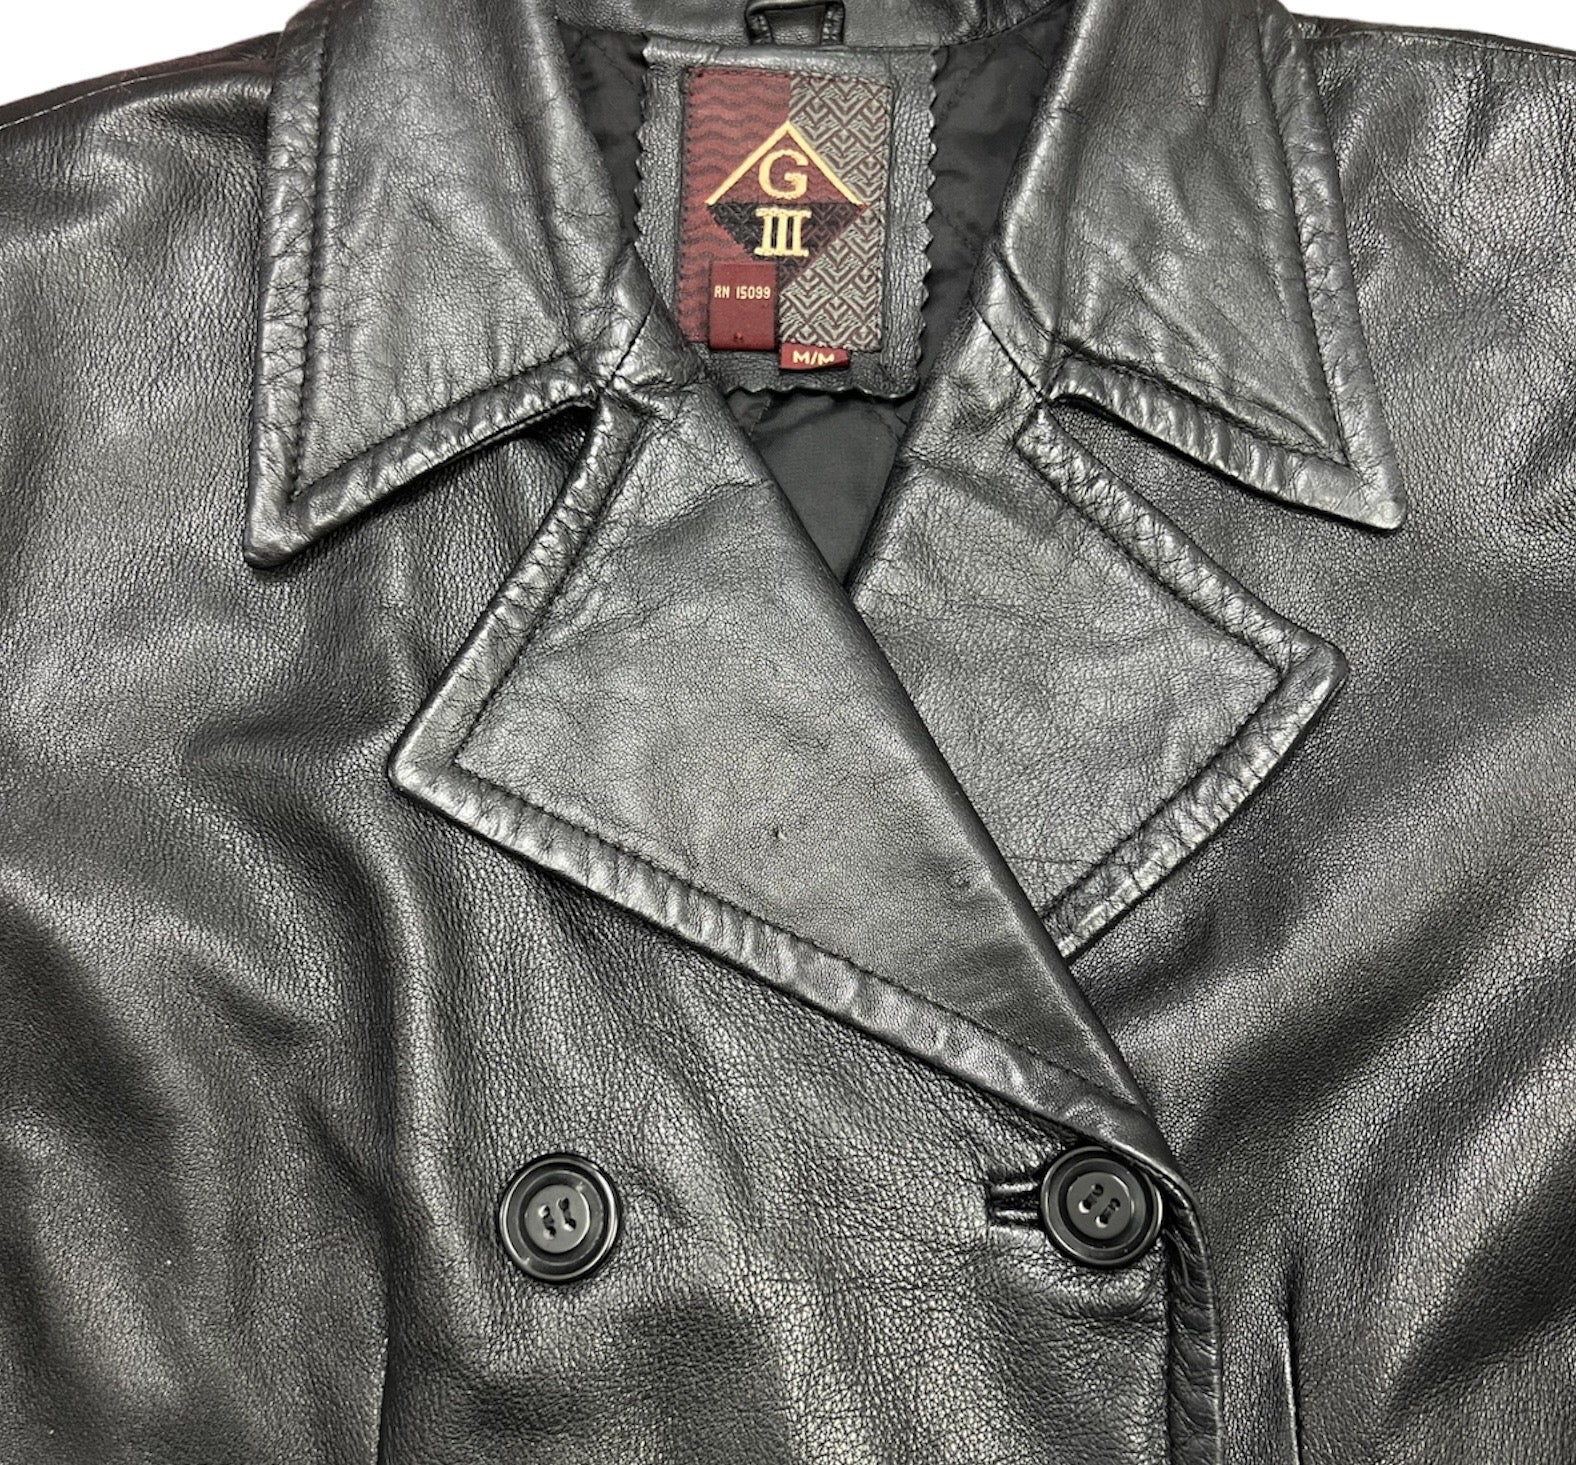 Women’s Vintage Double Breasted Black Leather Jacket Size M